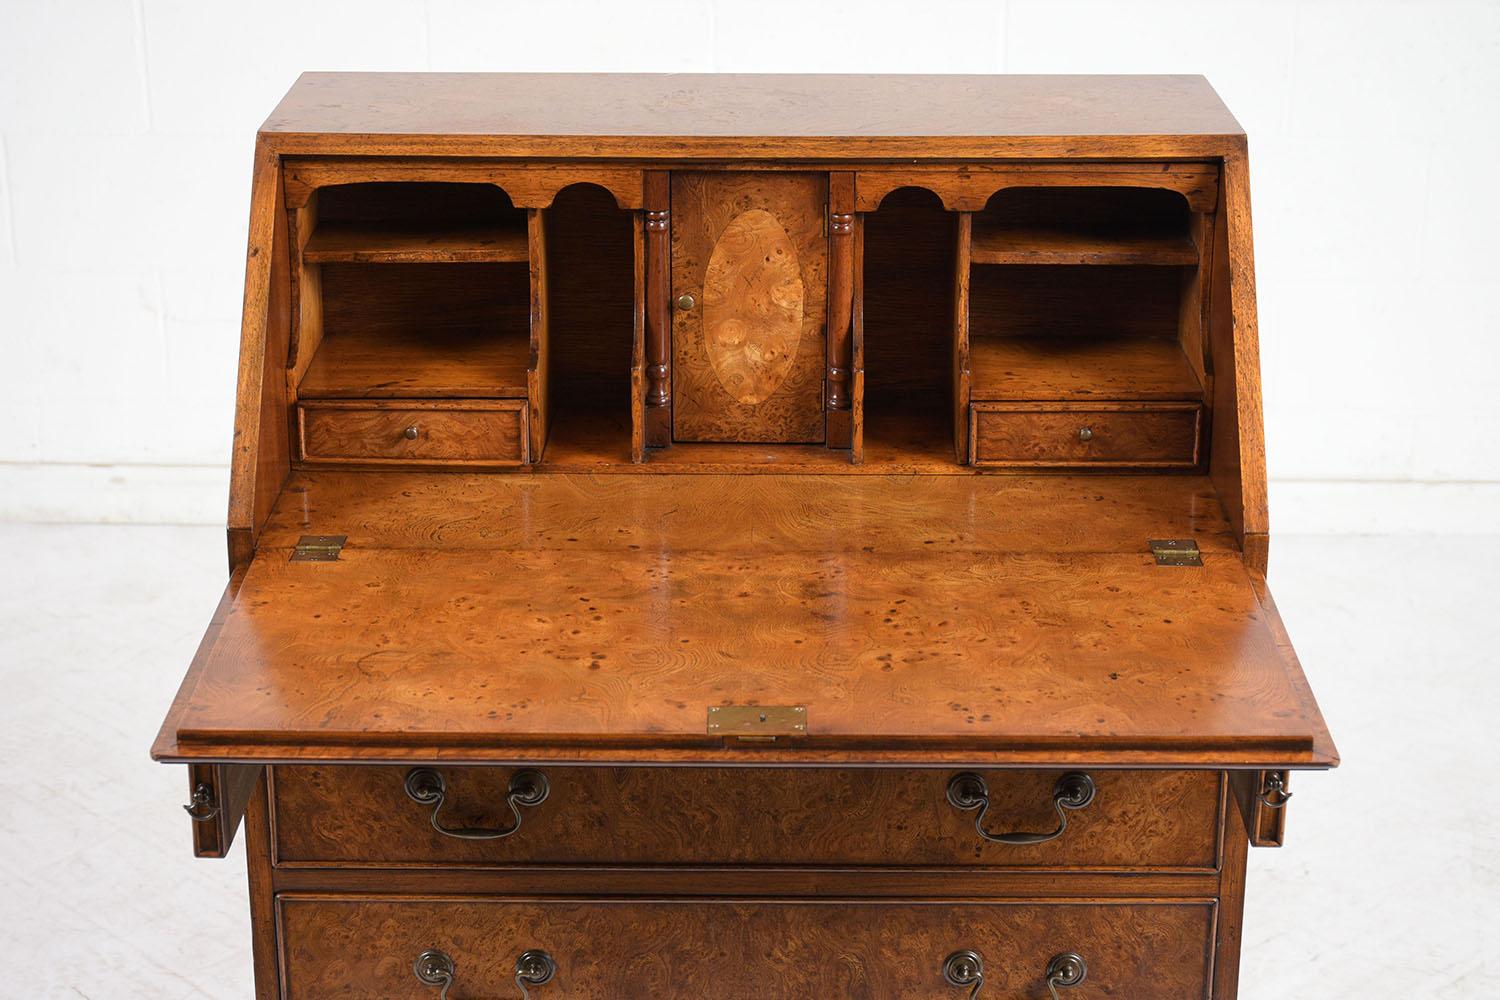 Late 20th Century English Traditional Style Burled Slant Front Desk